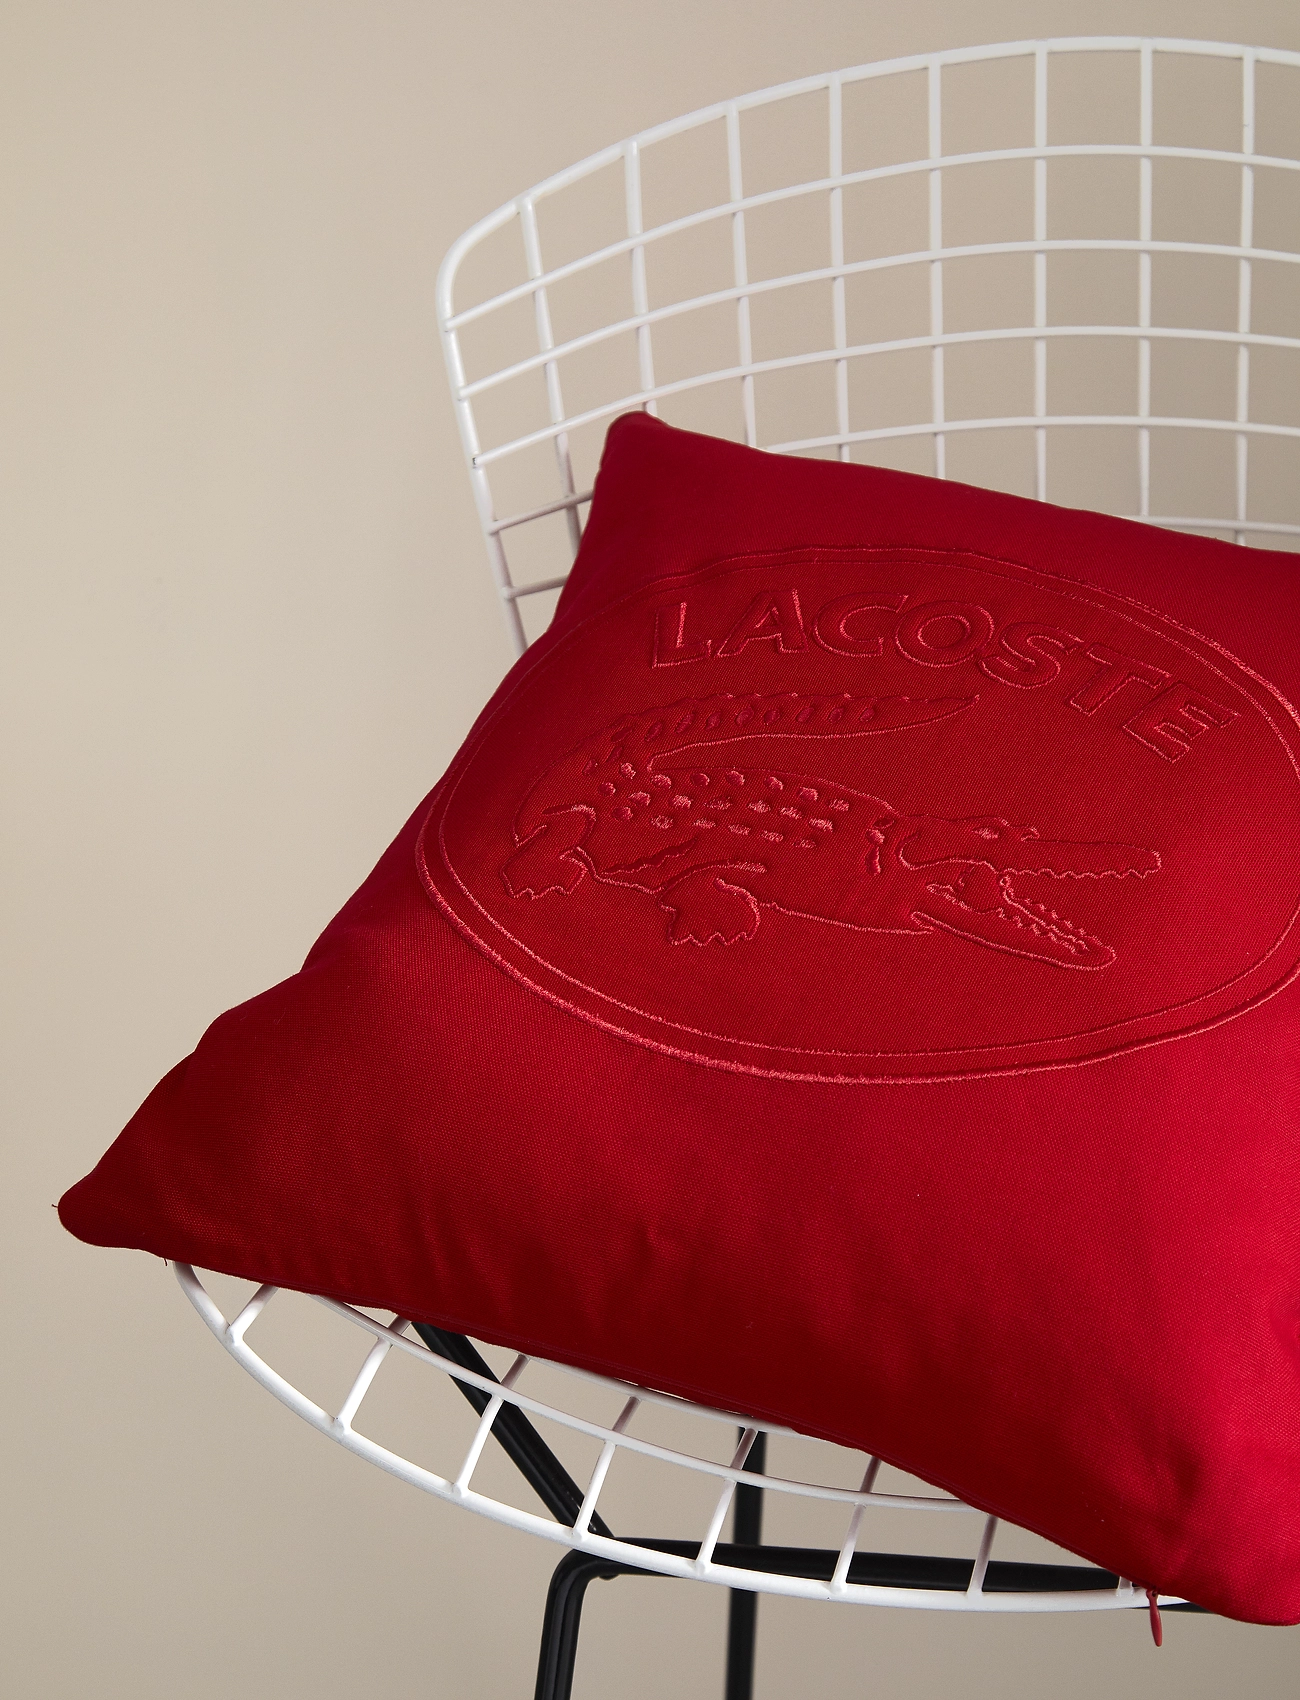 Lacoste Home - LLACOSTE Cushion cover - kuddfodral - rouge - 1